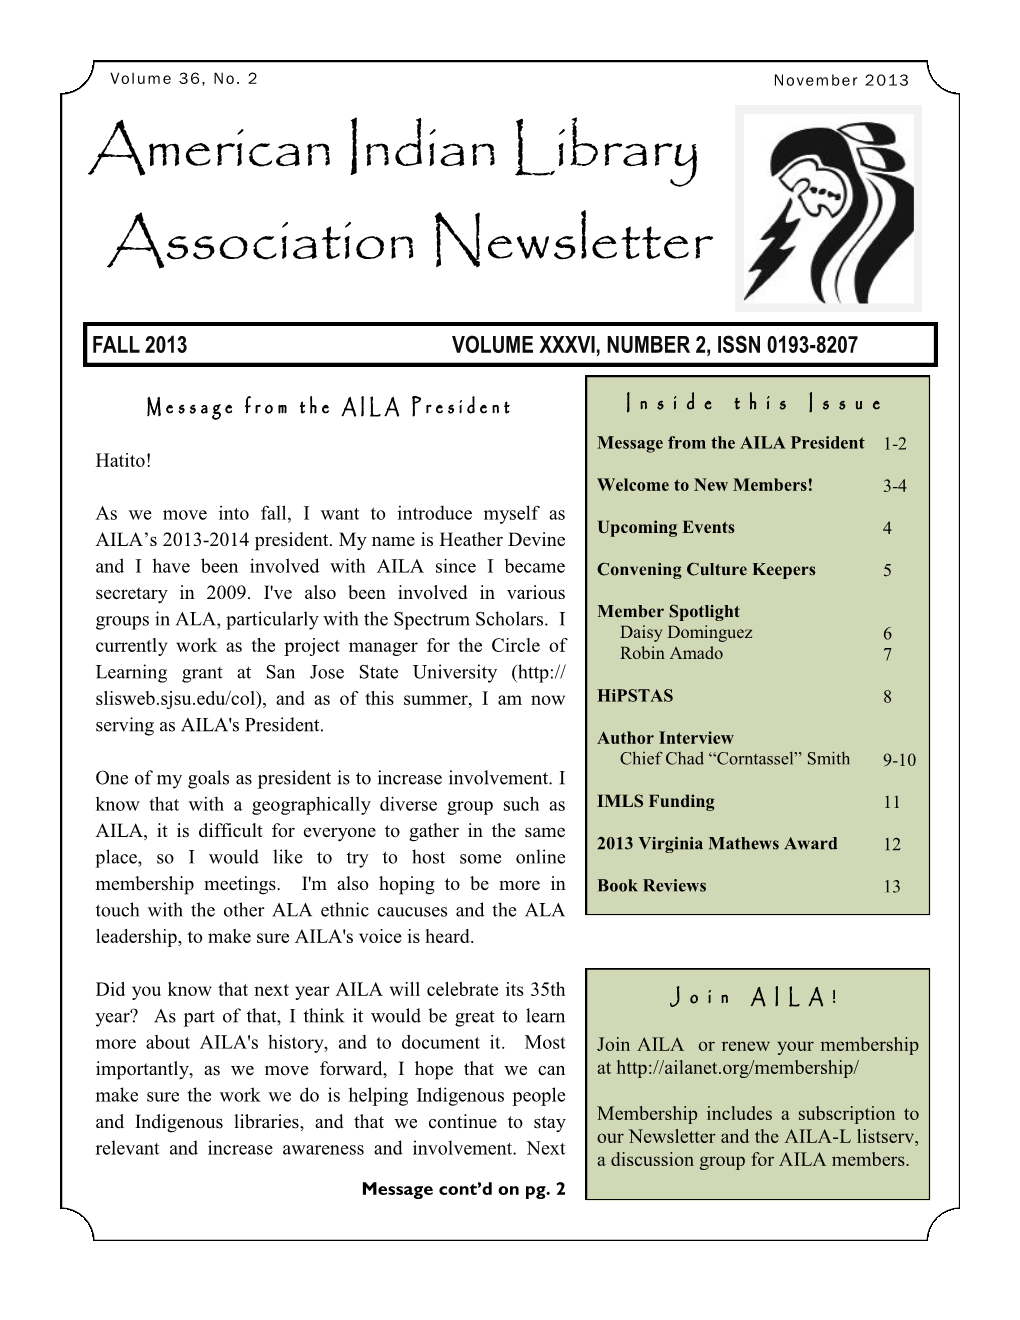 American Indian Library Association Newsletter